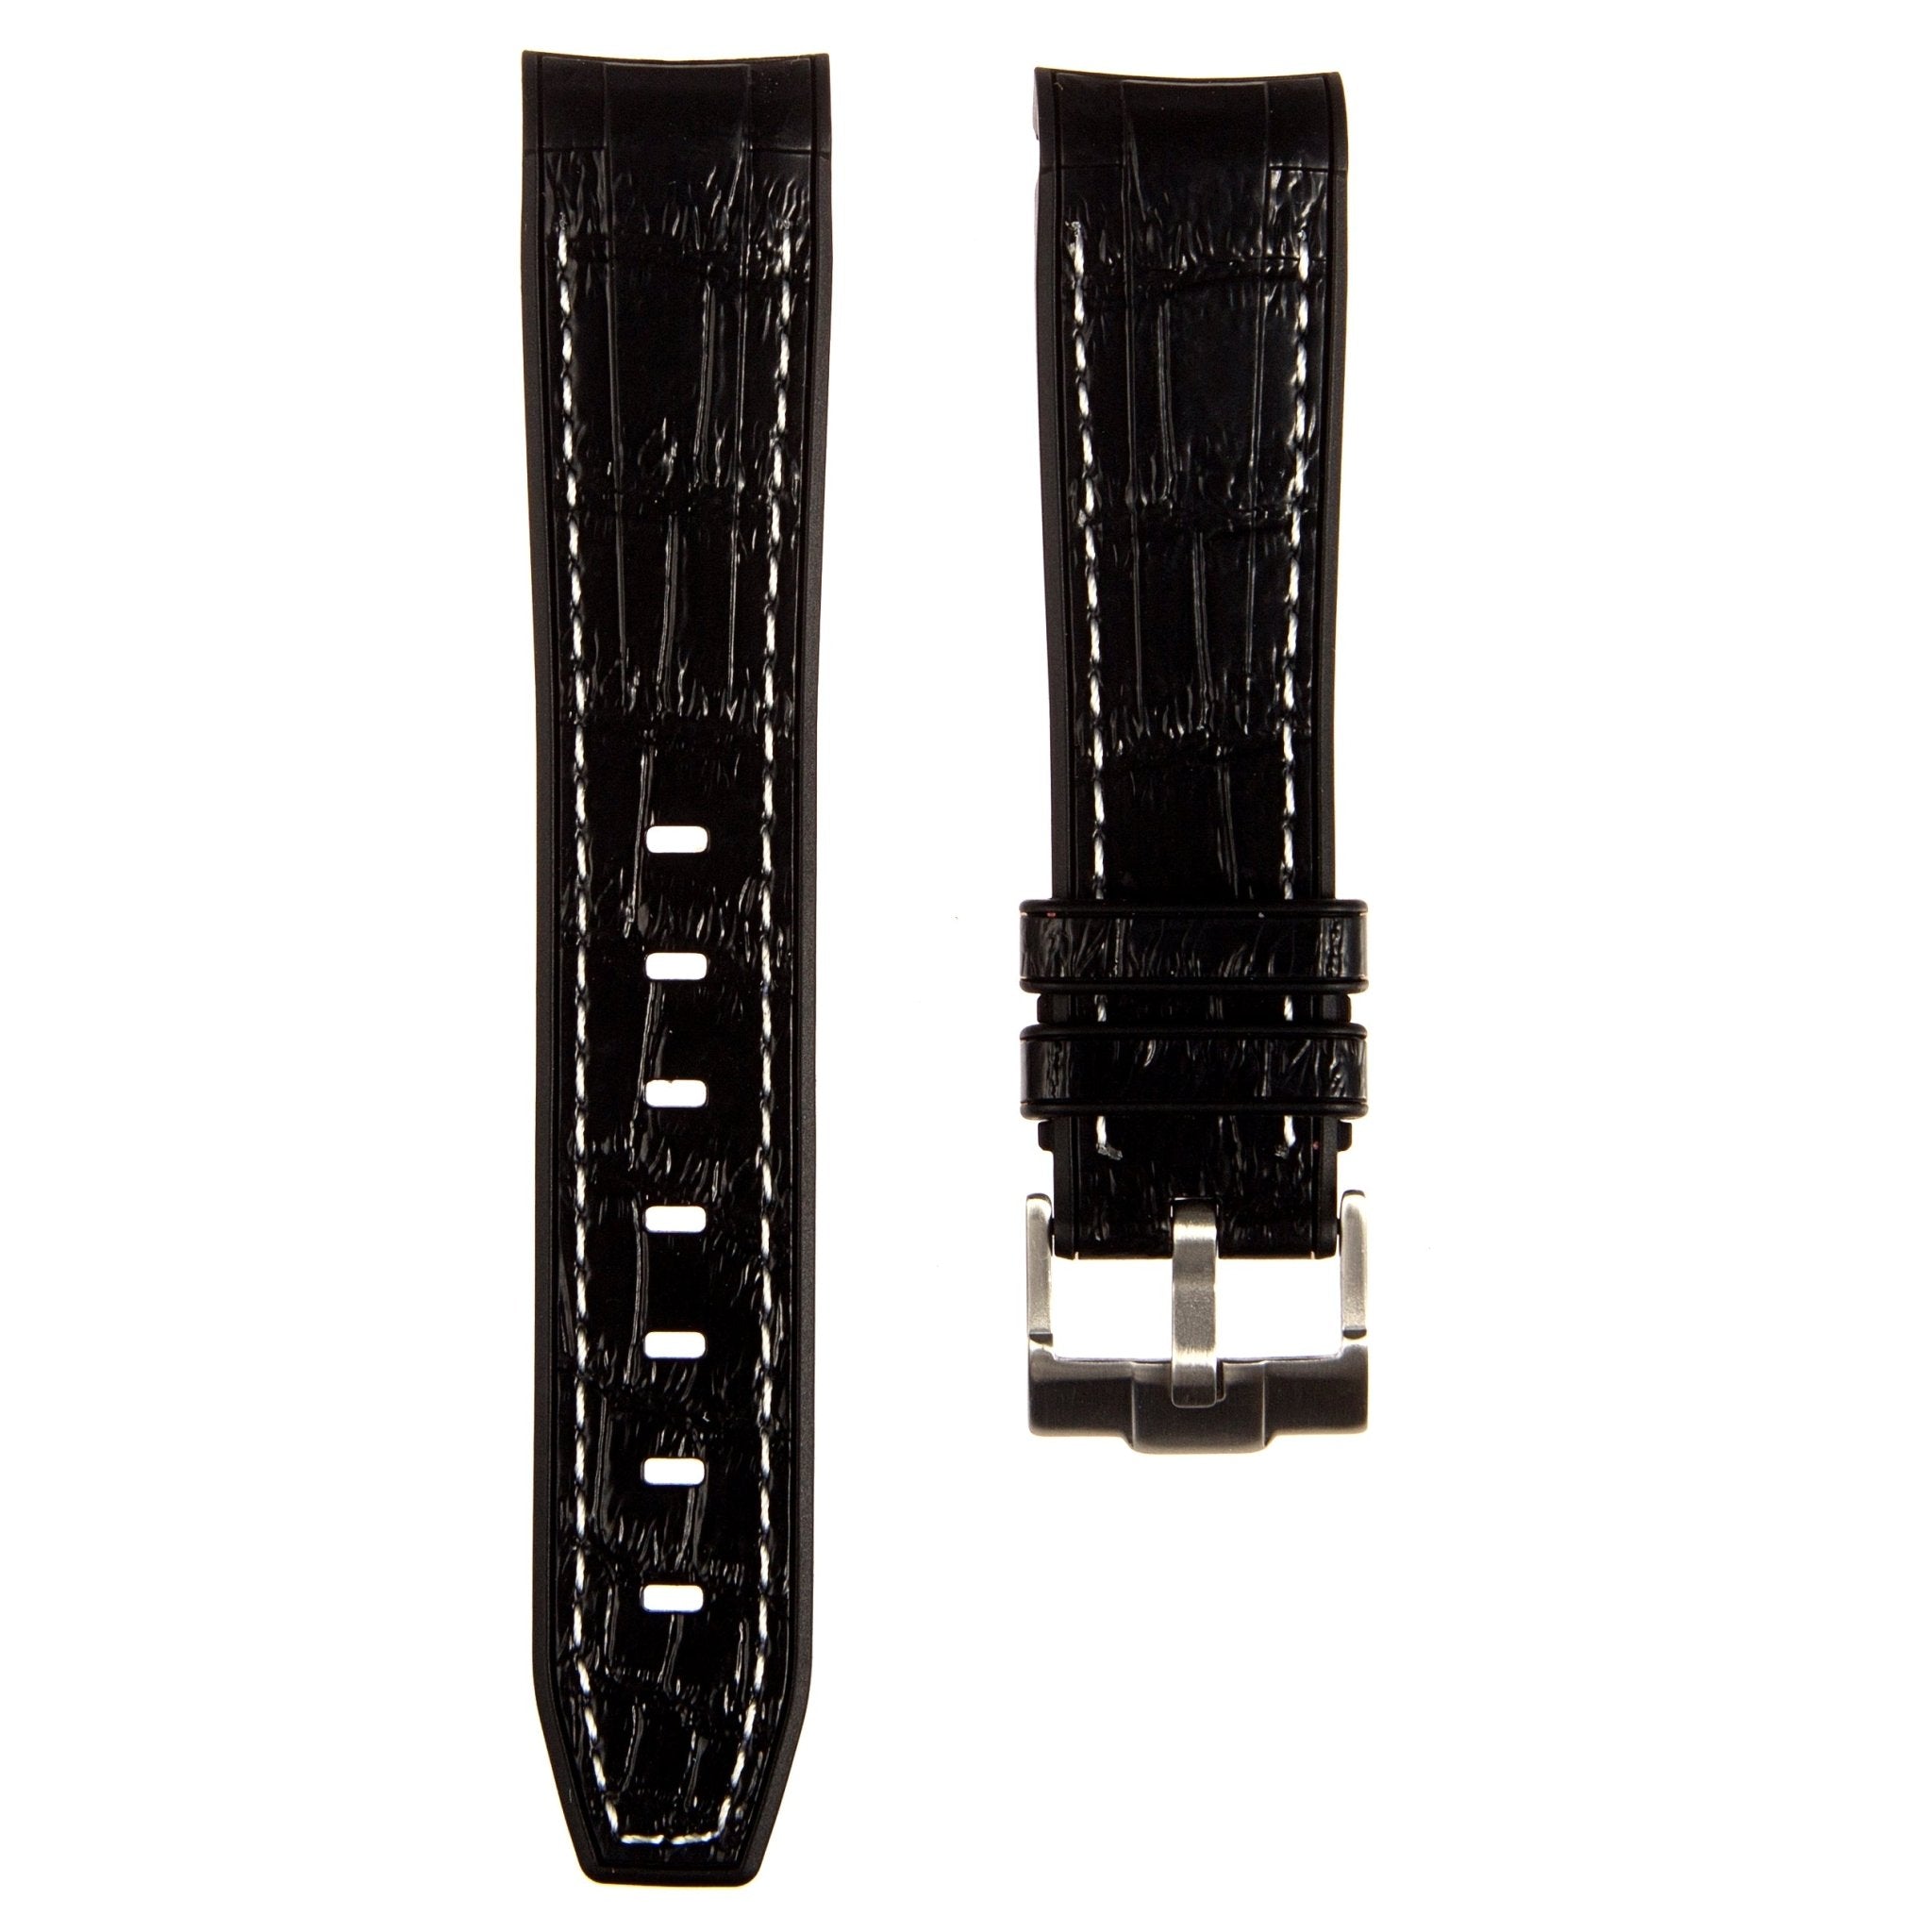 Alligator Embossed Curved End Premium Silicone Strap - Black with White Stitch (2406) -StrapSeeker